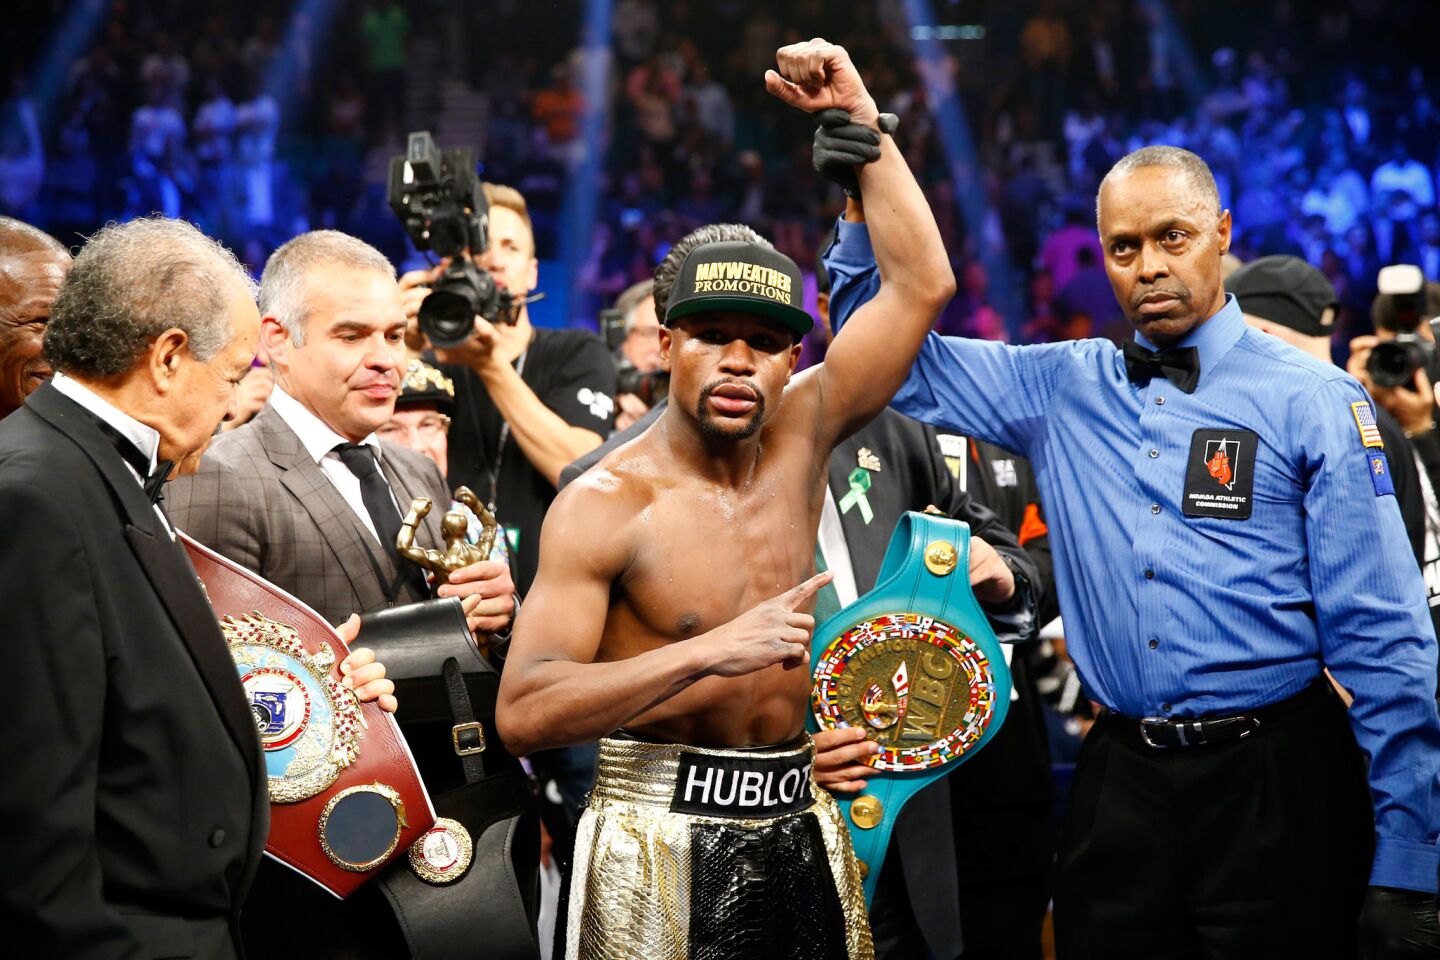 Floyd Mayweather Jr. retained his welterweight title by defeating Manny Pacquiao by unanimous decision.